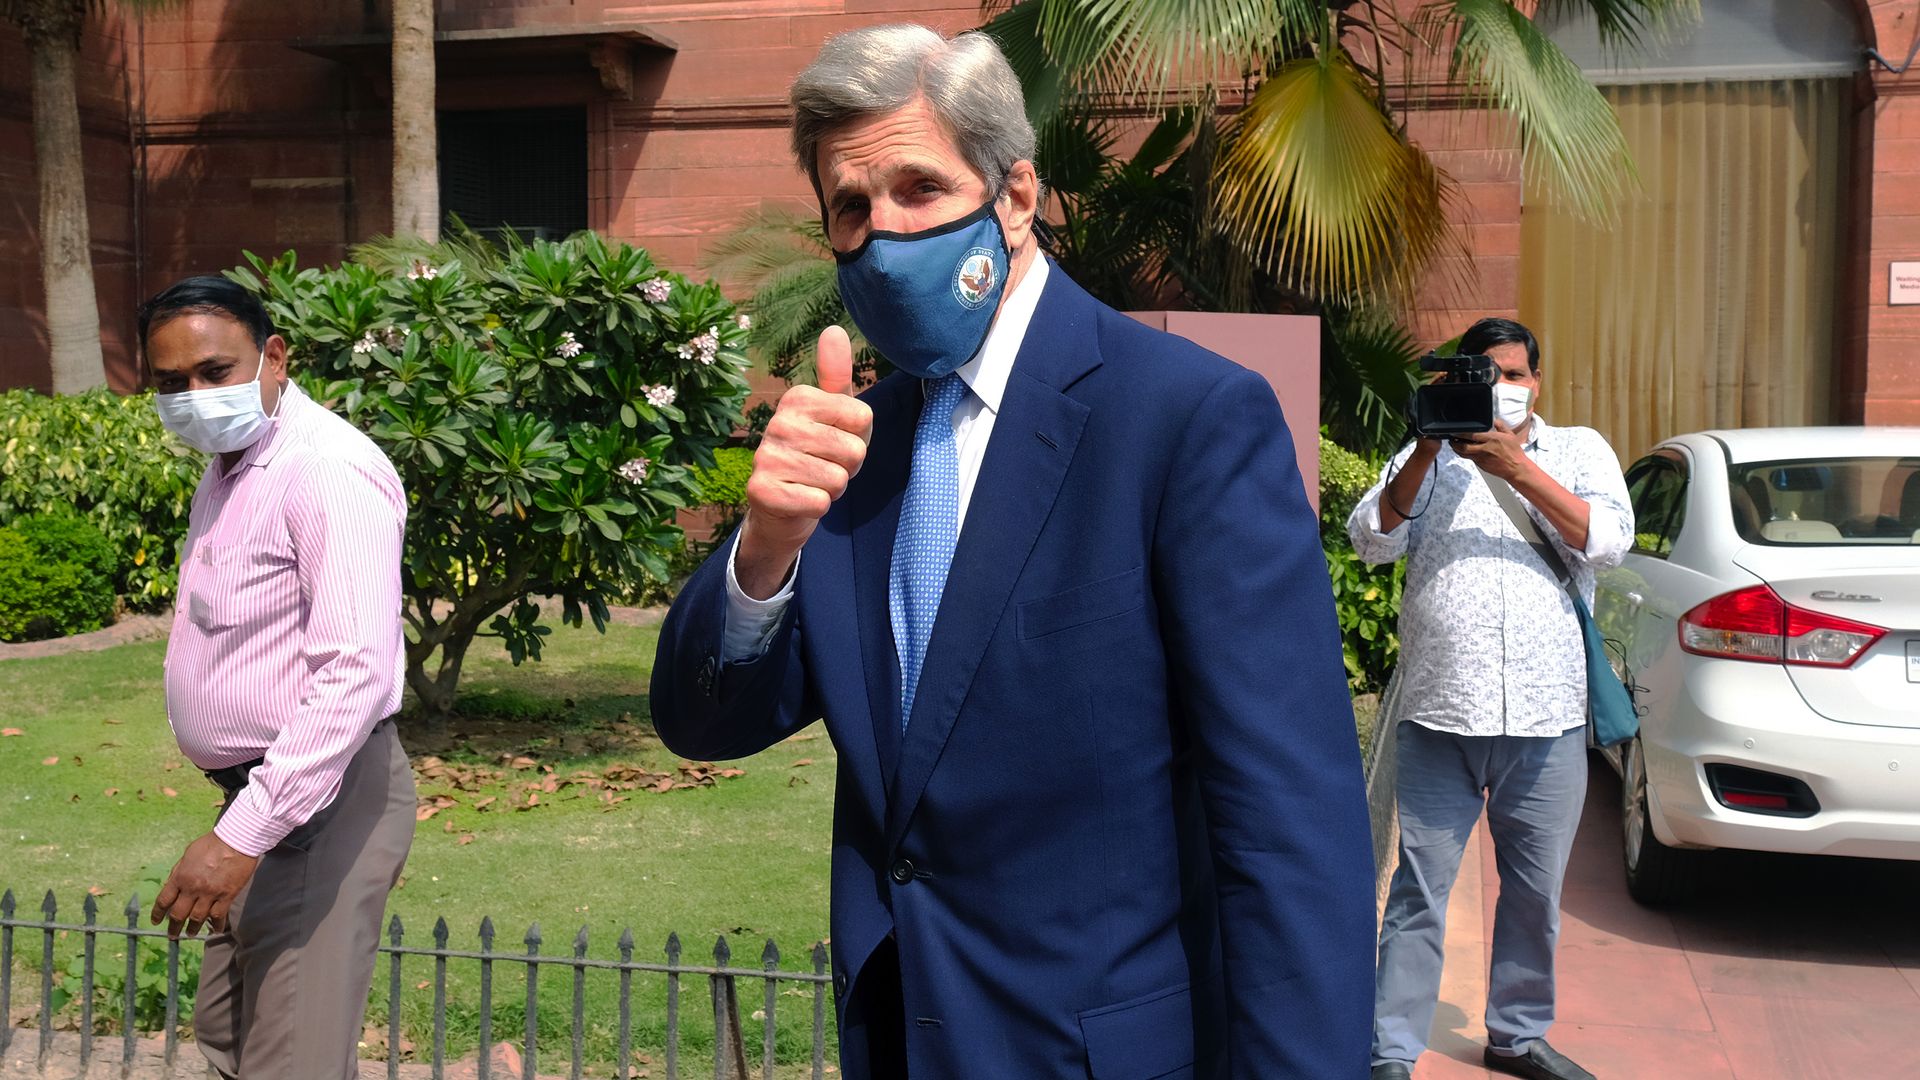 Image of Special Presidential Envoy for Climate Change John Kerry giving a thumbs up sign.